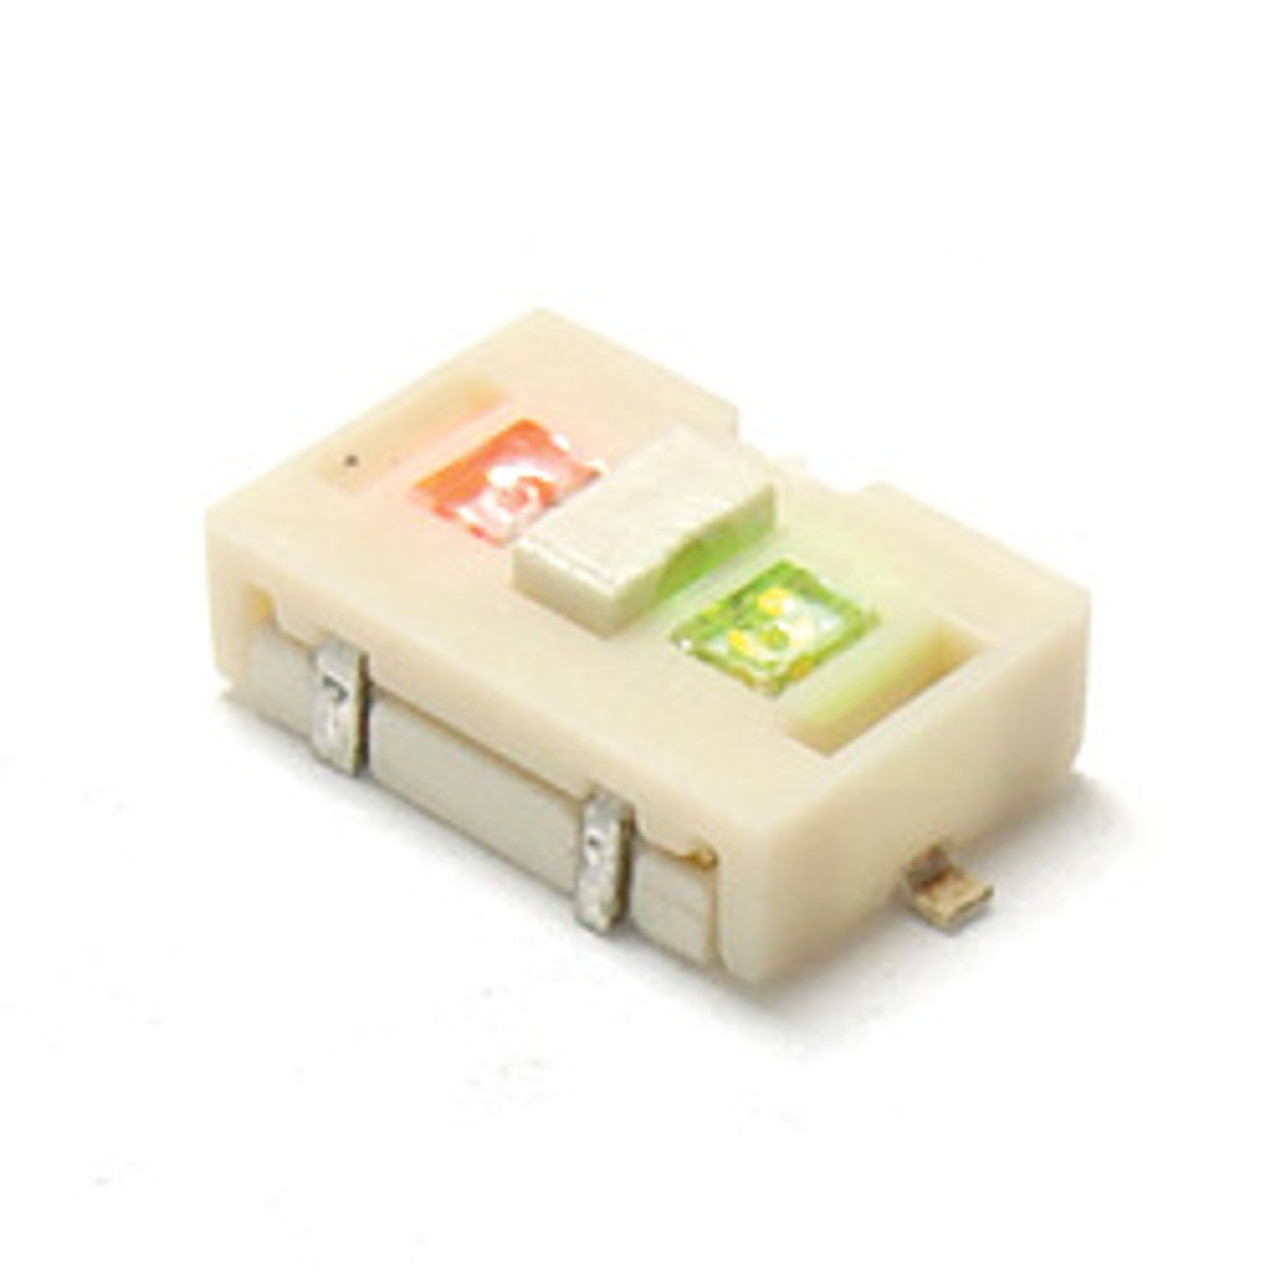 E-Switch TL-3200-A-F160-Y-Y-R Tactile Switches